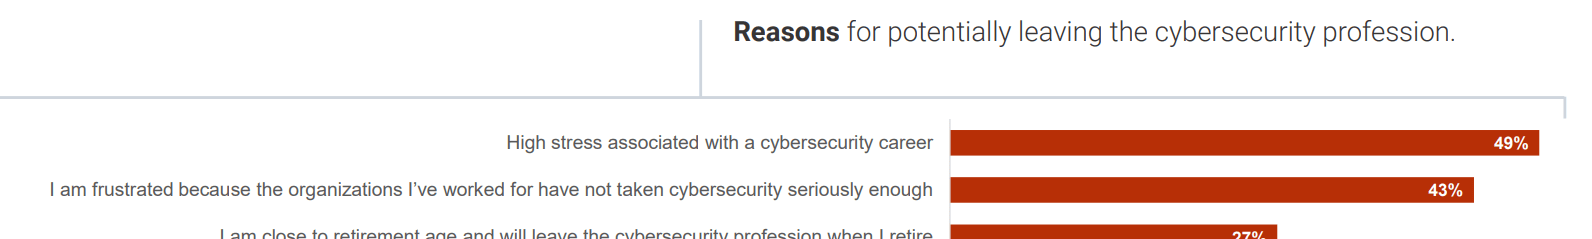 If Cybersecurity Professionals Had To Leave